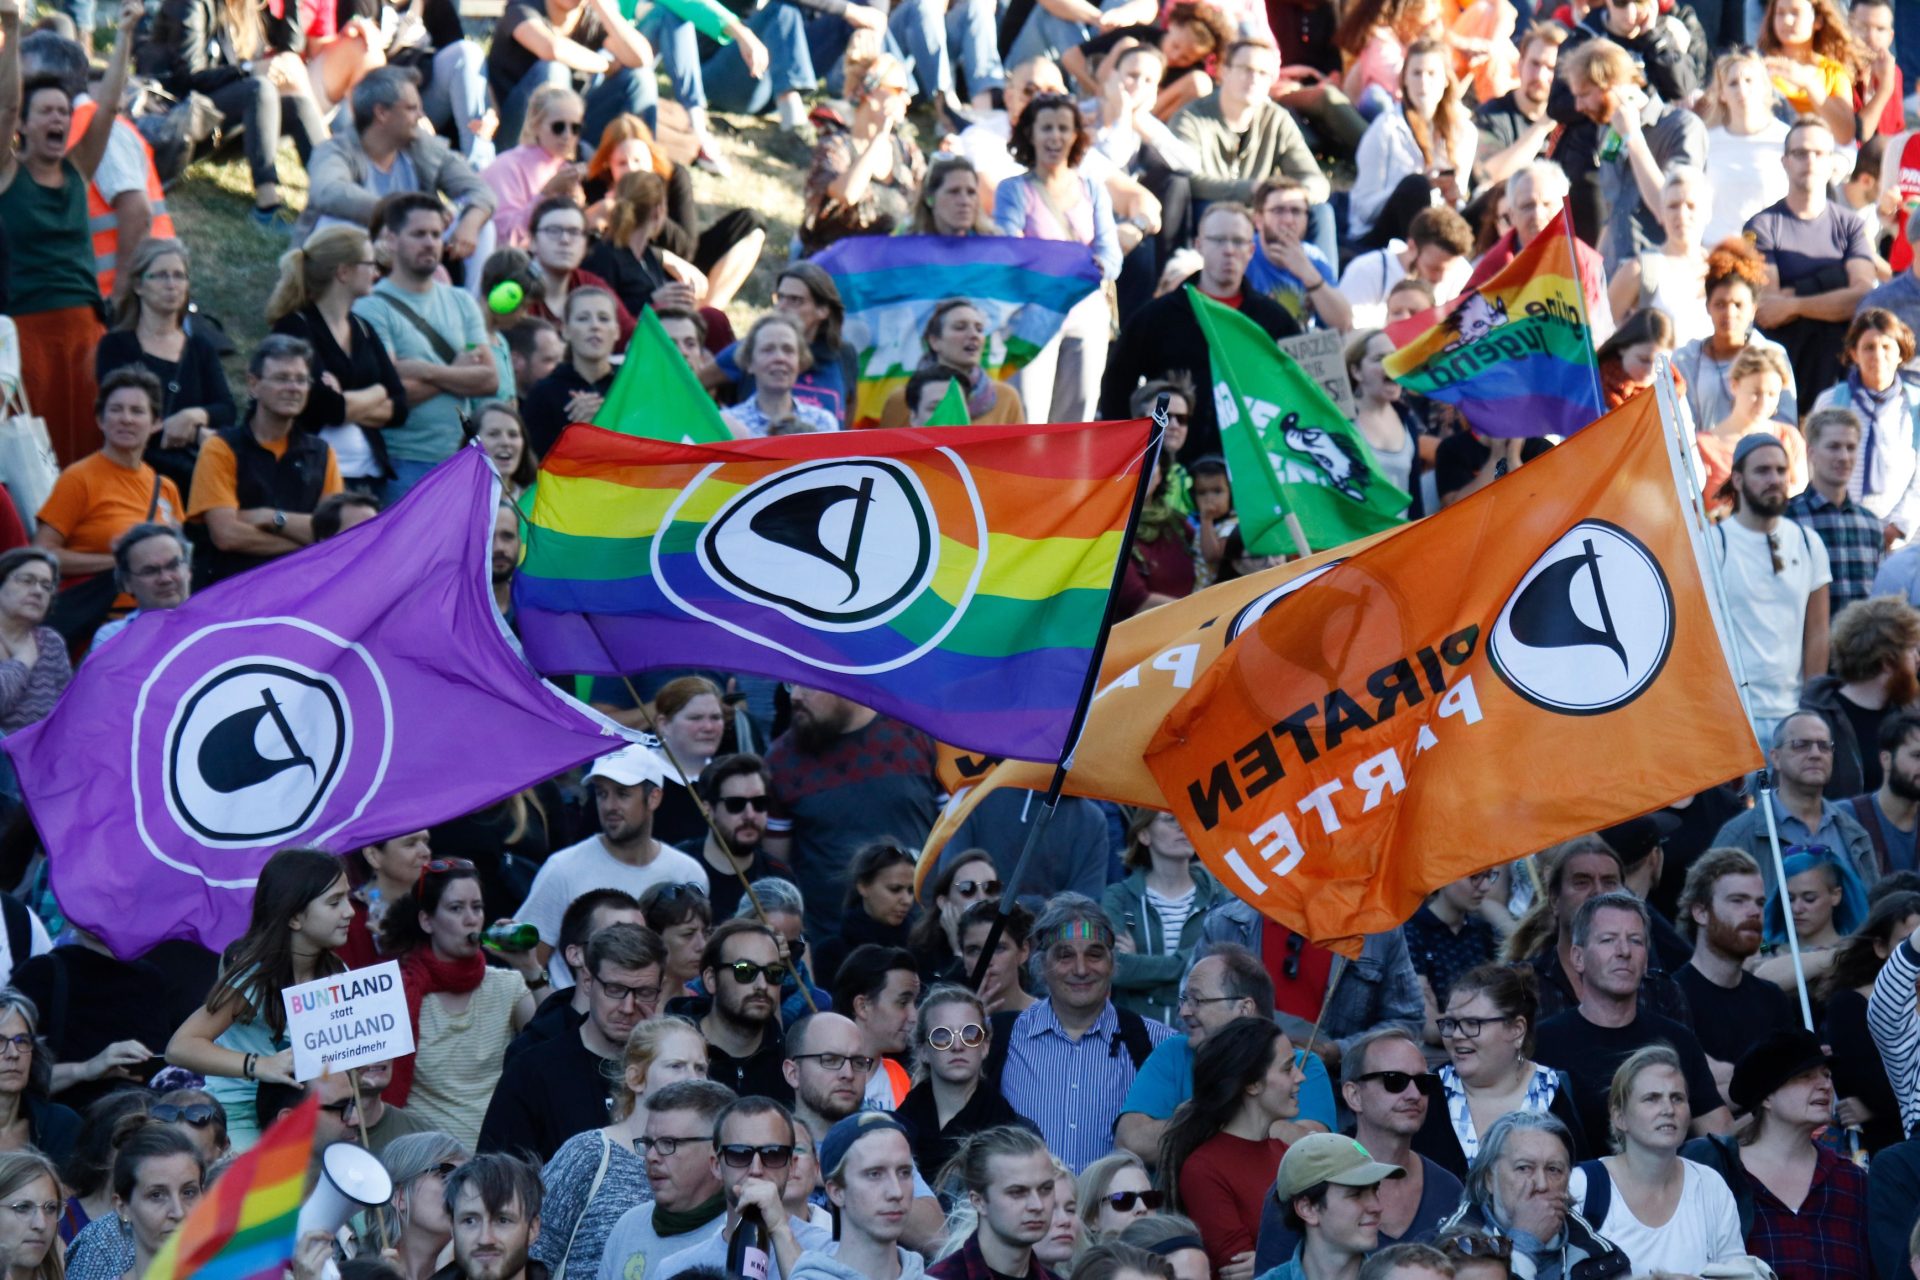 Pirate Party Flags at a demonstration